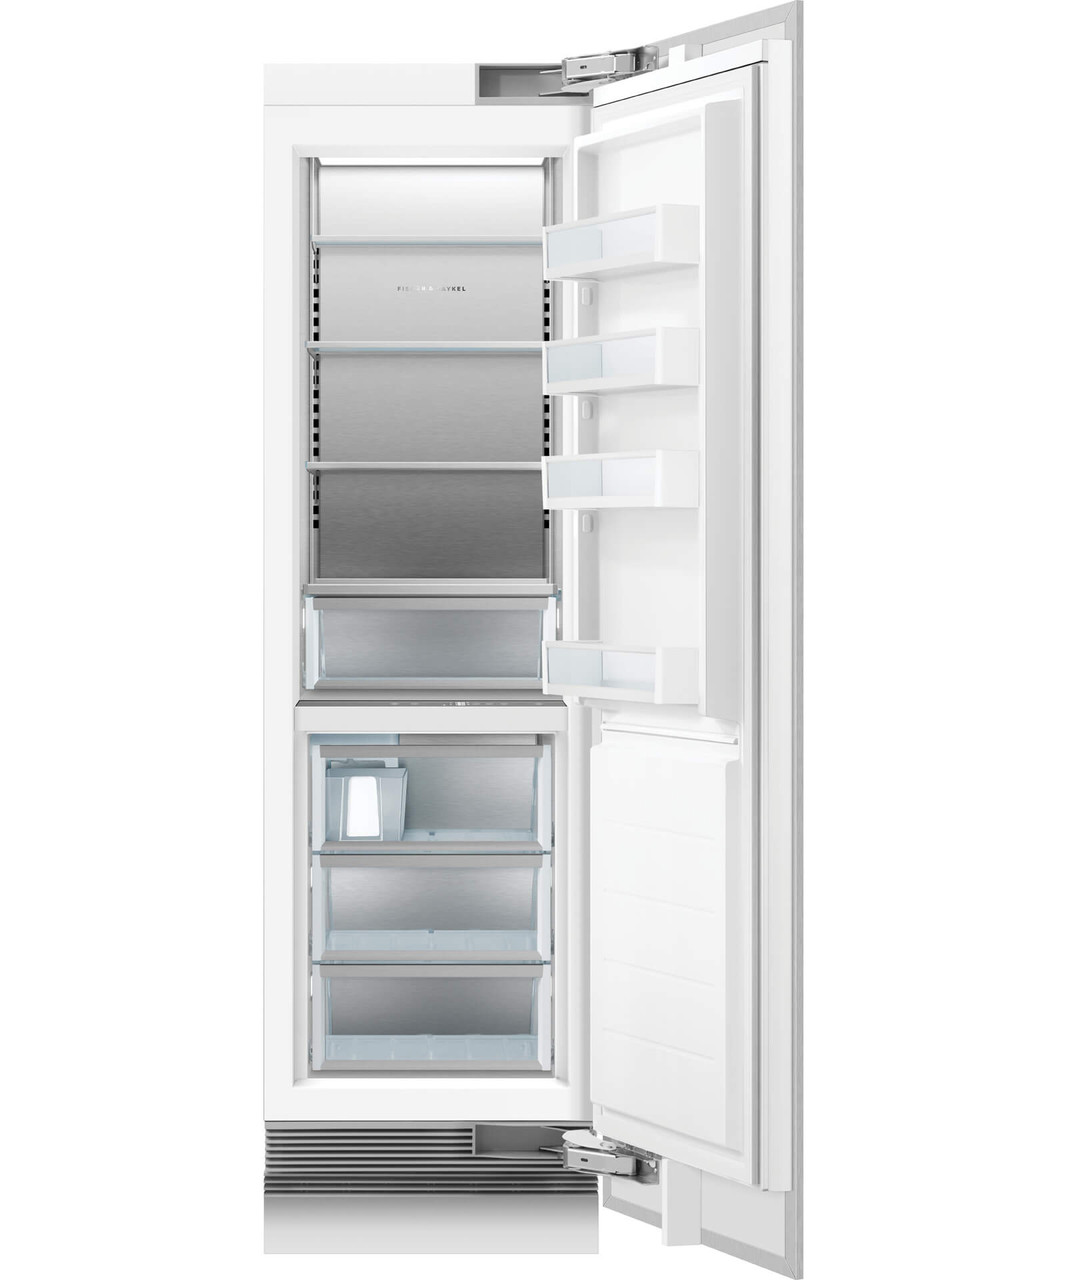 RS6121FRJK1 - 368L Integrated Column Freezer 610mm - Stainless Steel Interior, Right hinge